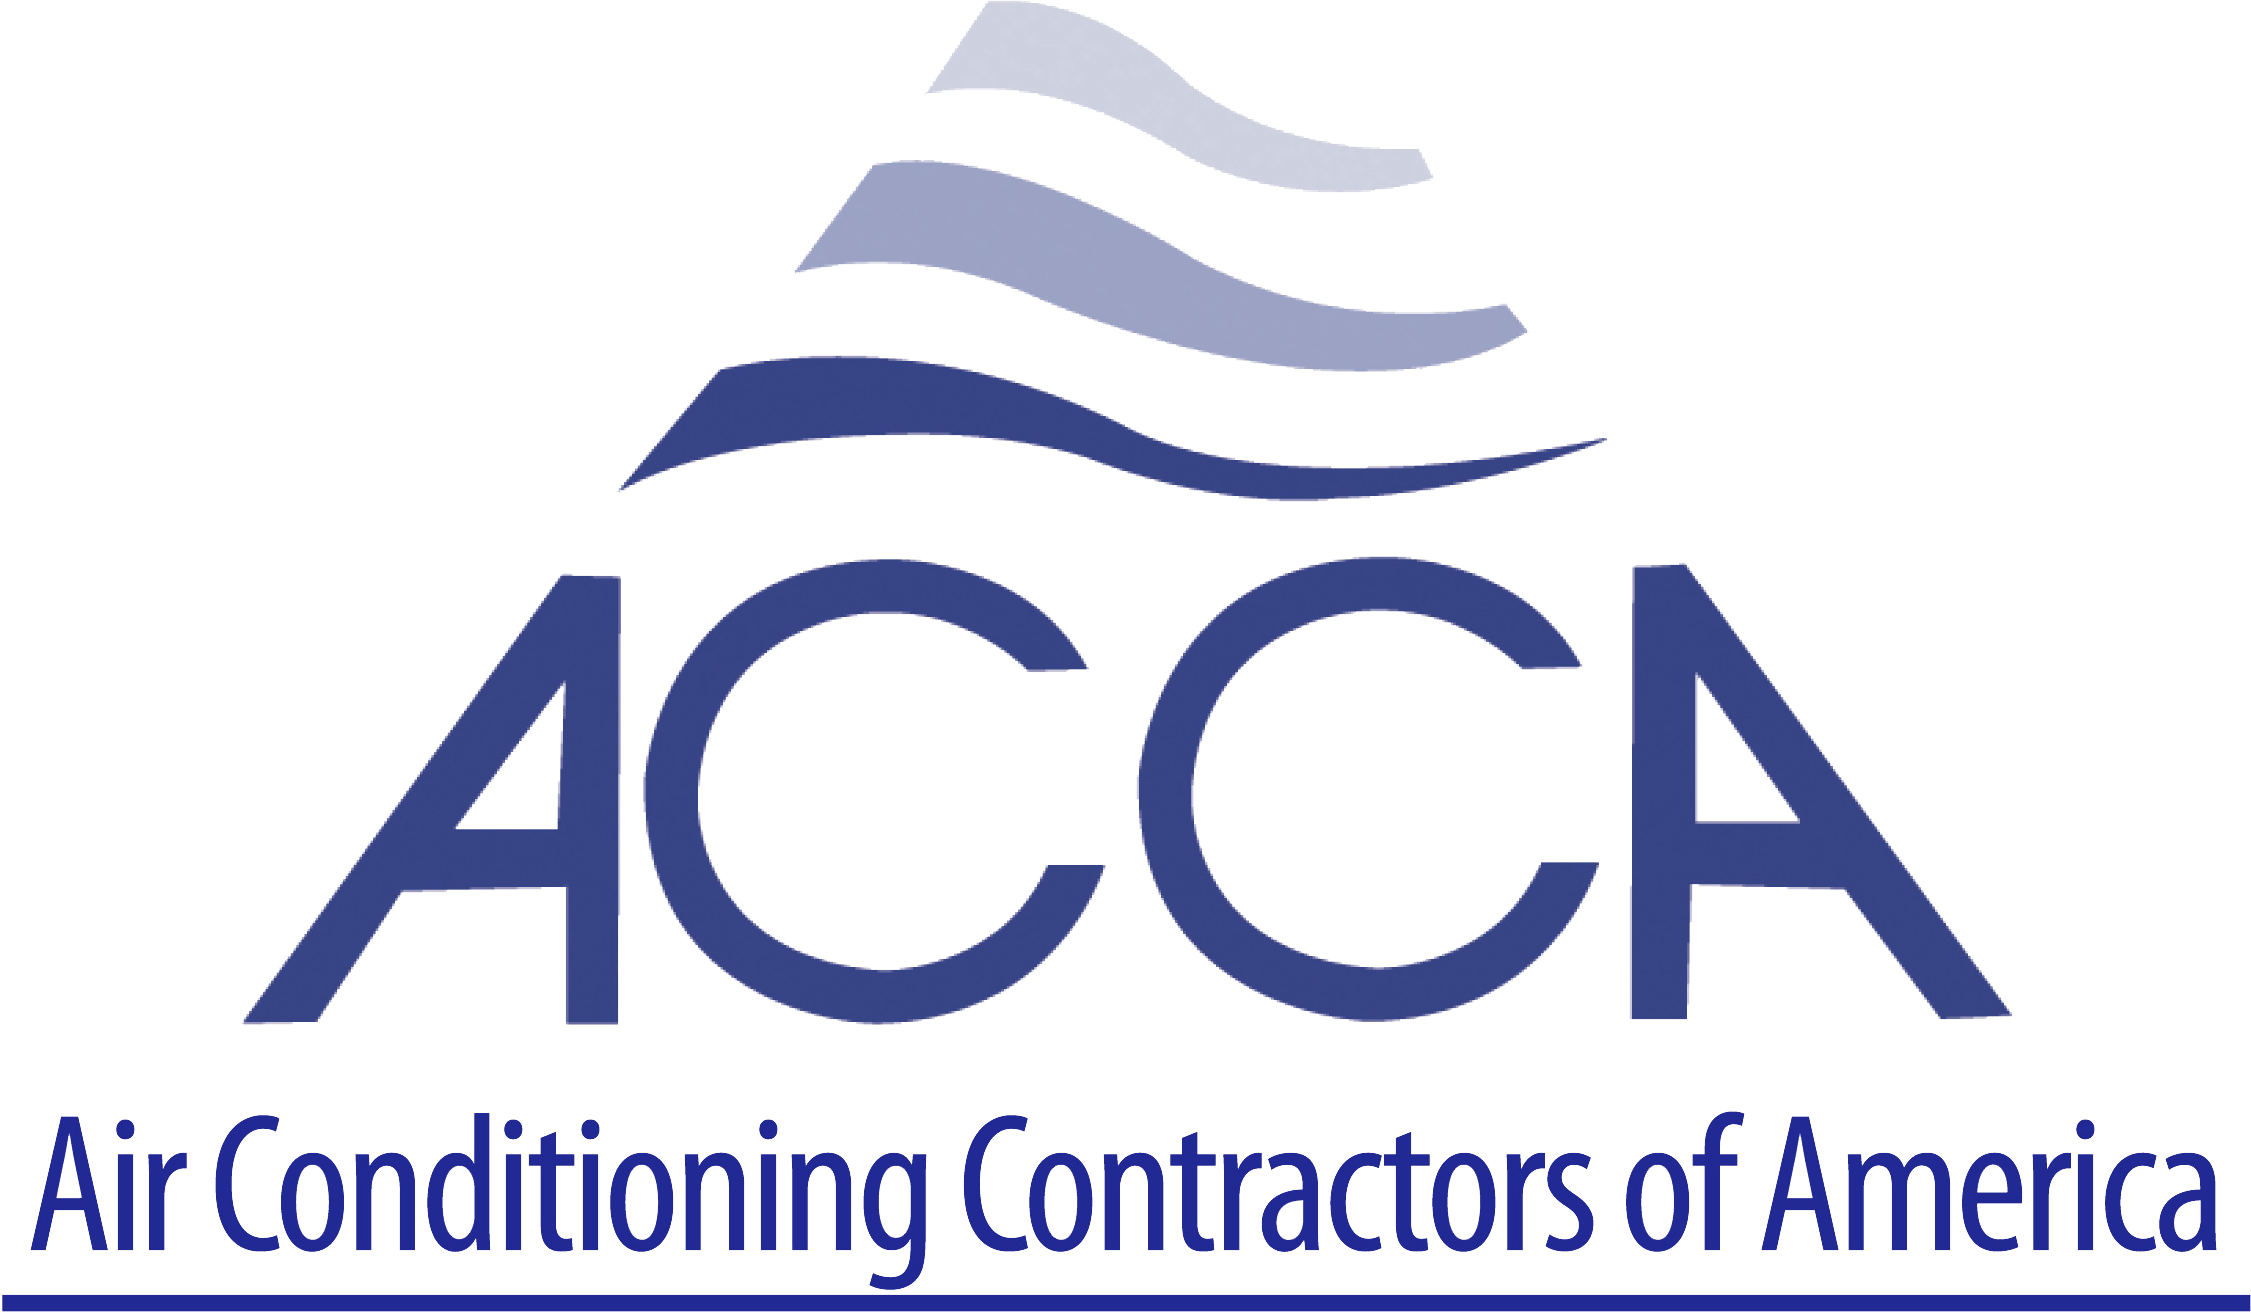 For Heat Pump replacement in Tewksbury MA, opt for an ACCA member.